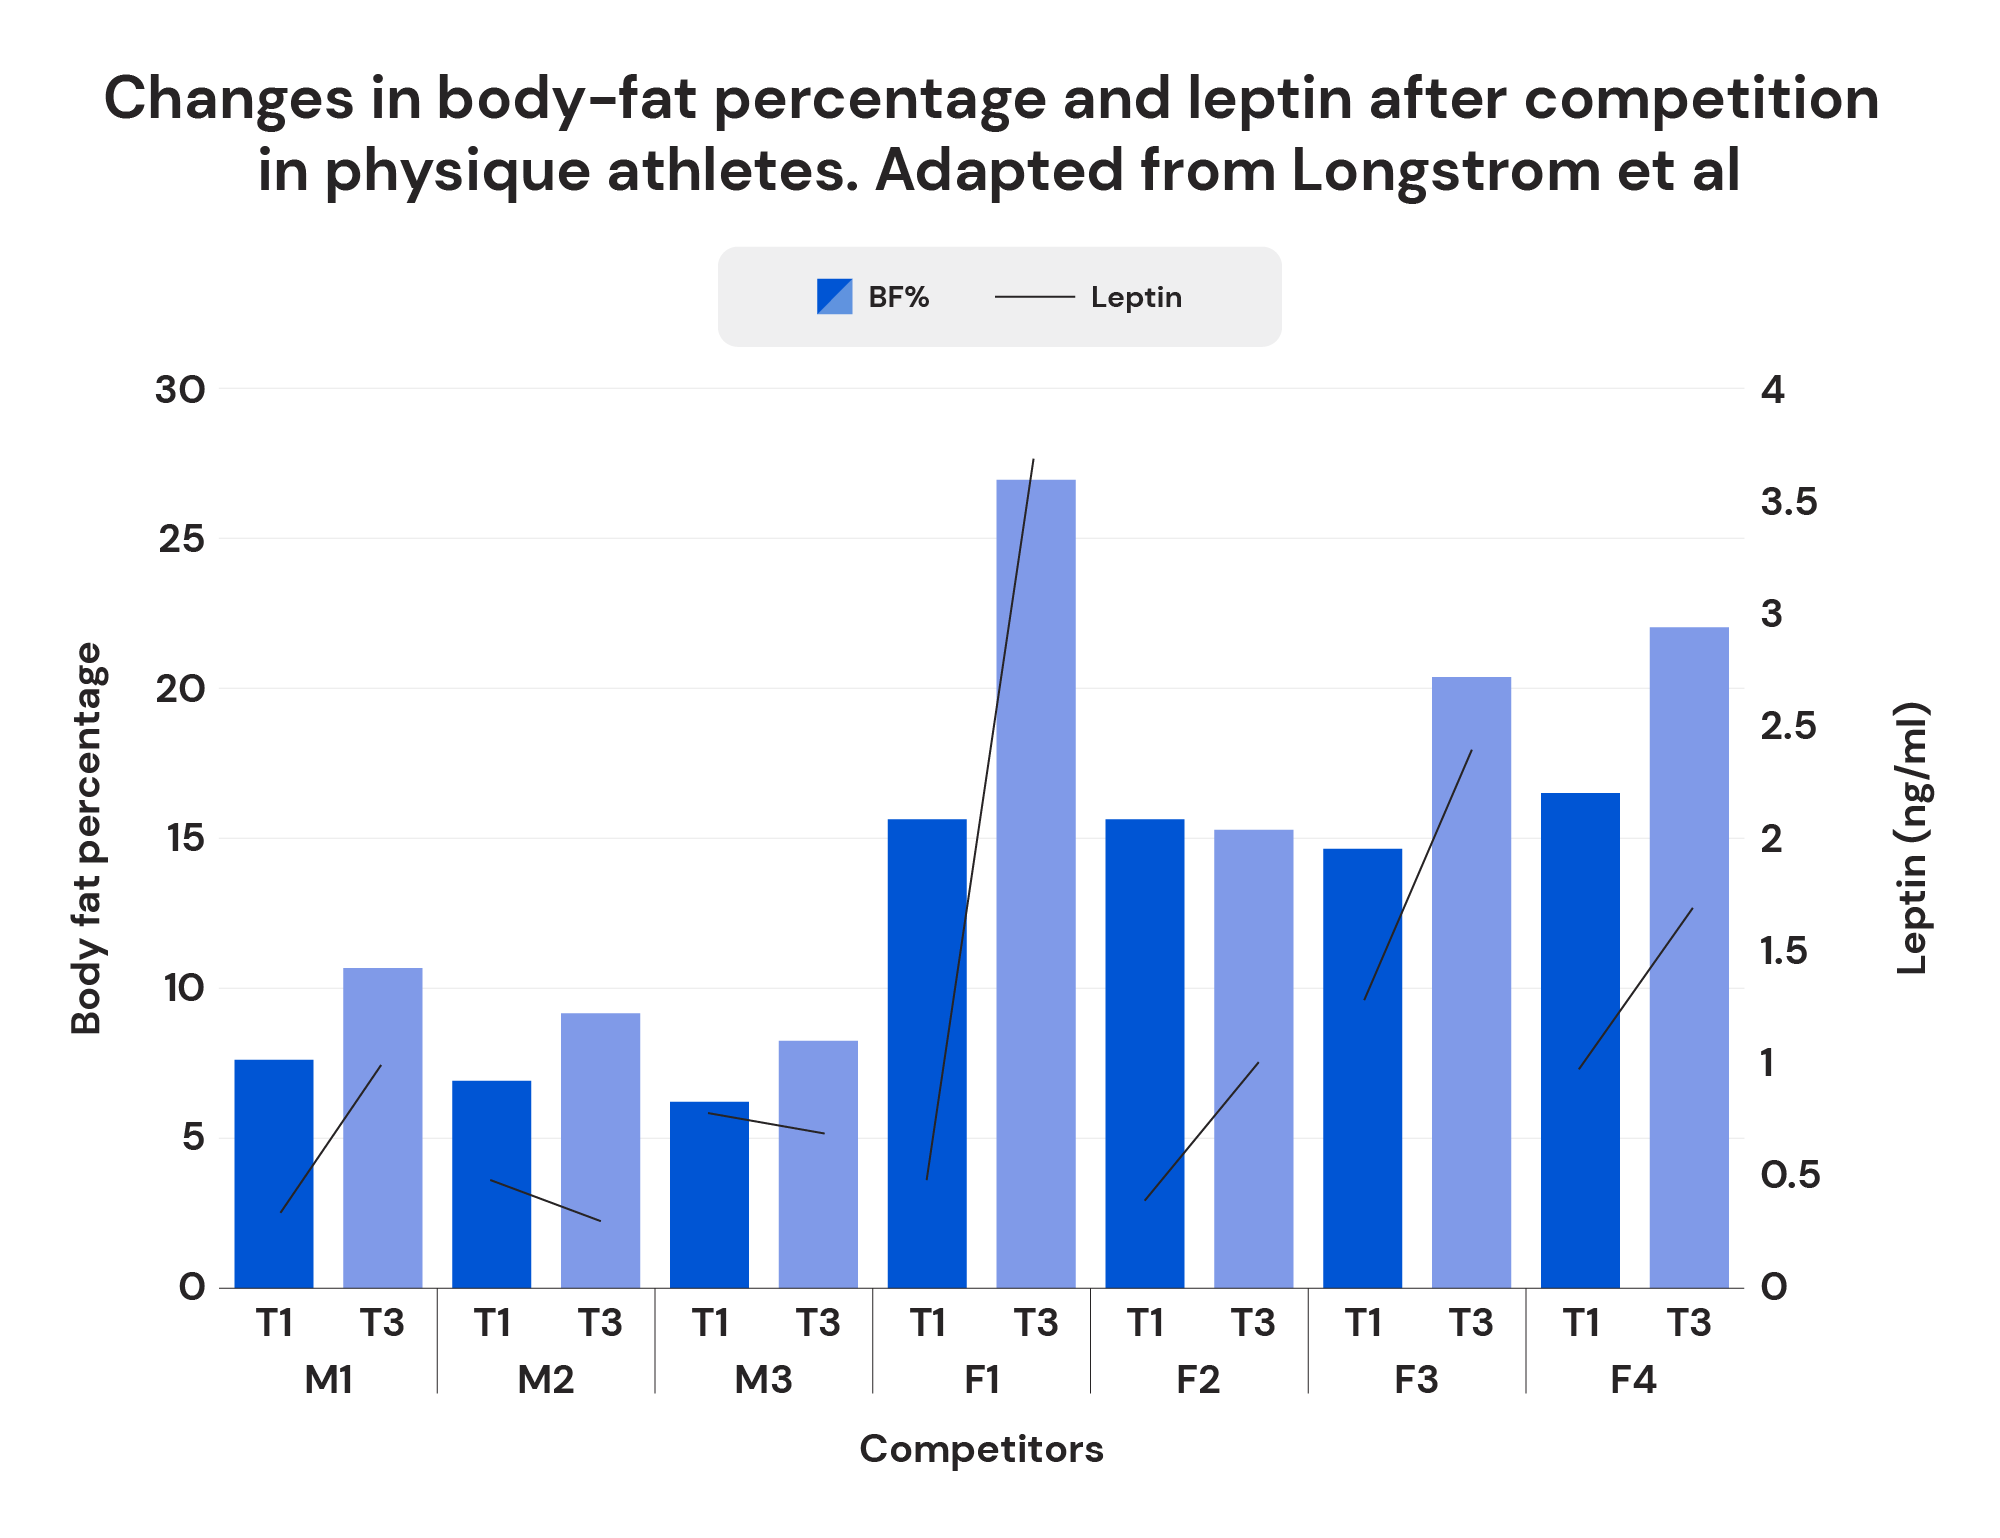 Changes in body-fat percentage and leptin after competition in physique athletes